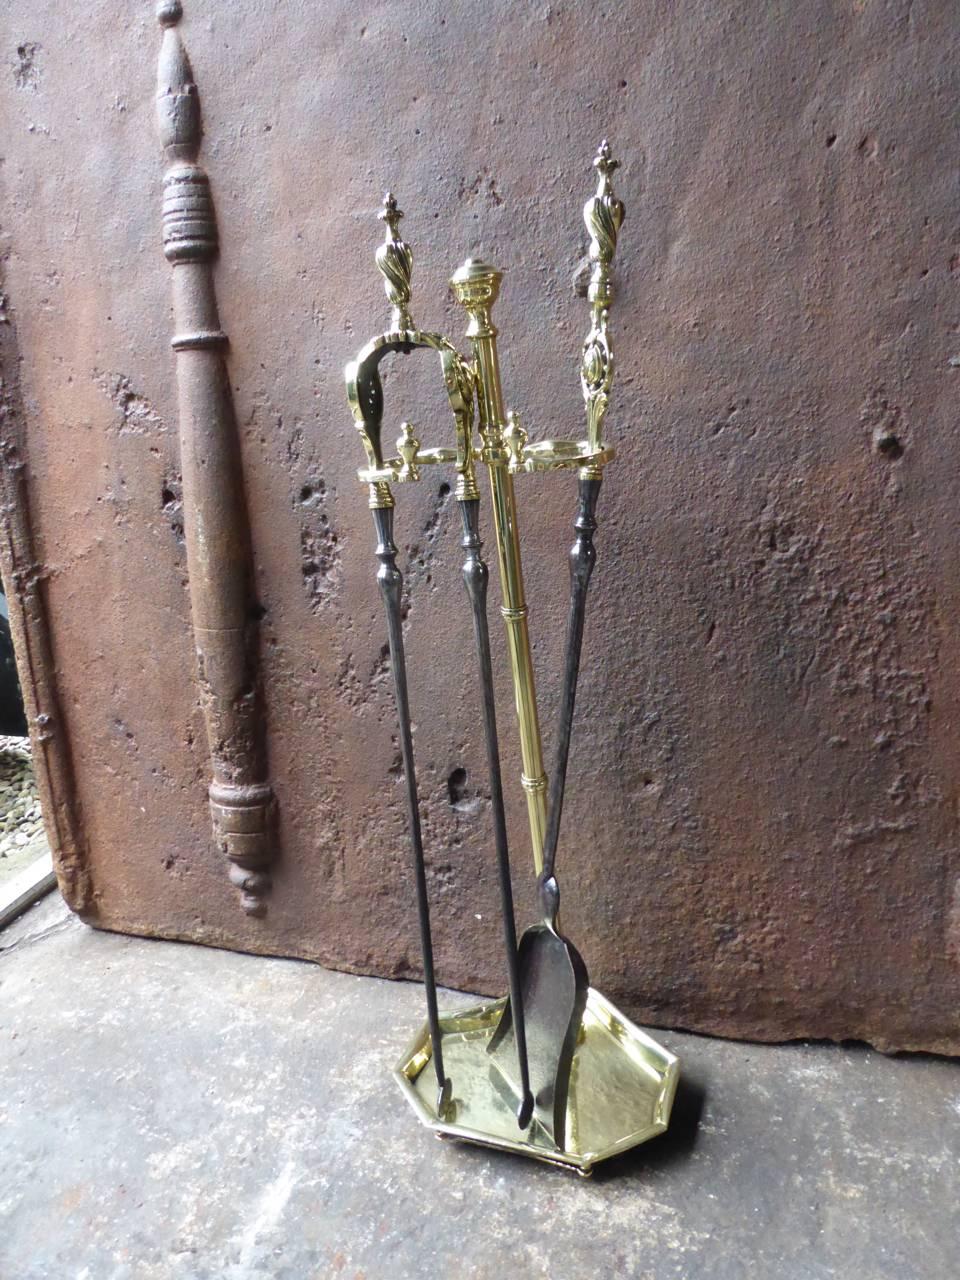 19th century French fireplace tool set - fire irons made of polished brass and wrought iron.

We have a unique and specialized collection of antique and used fireplace accessories consisting of more than 1000 listings at 1stdibs. Amongst others, we